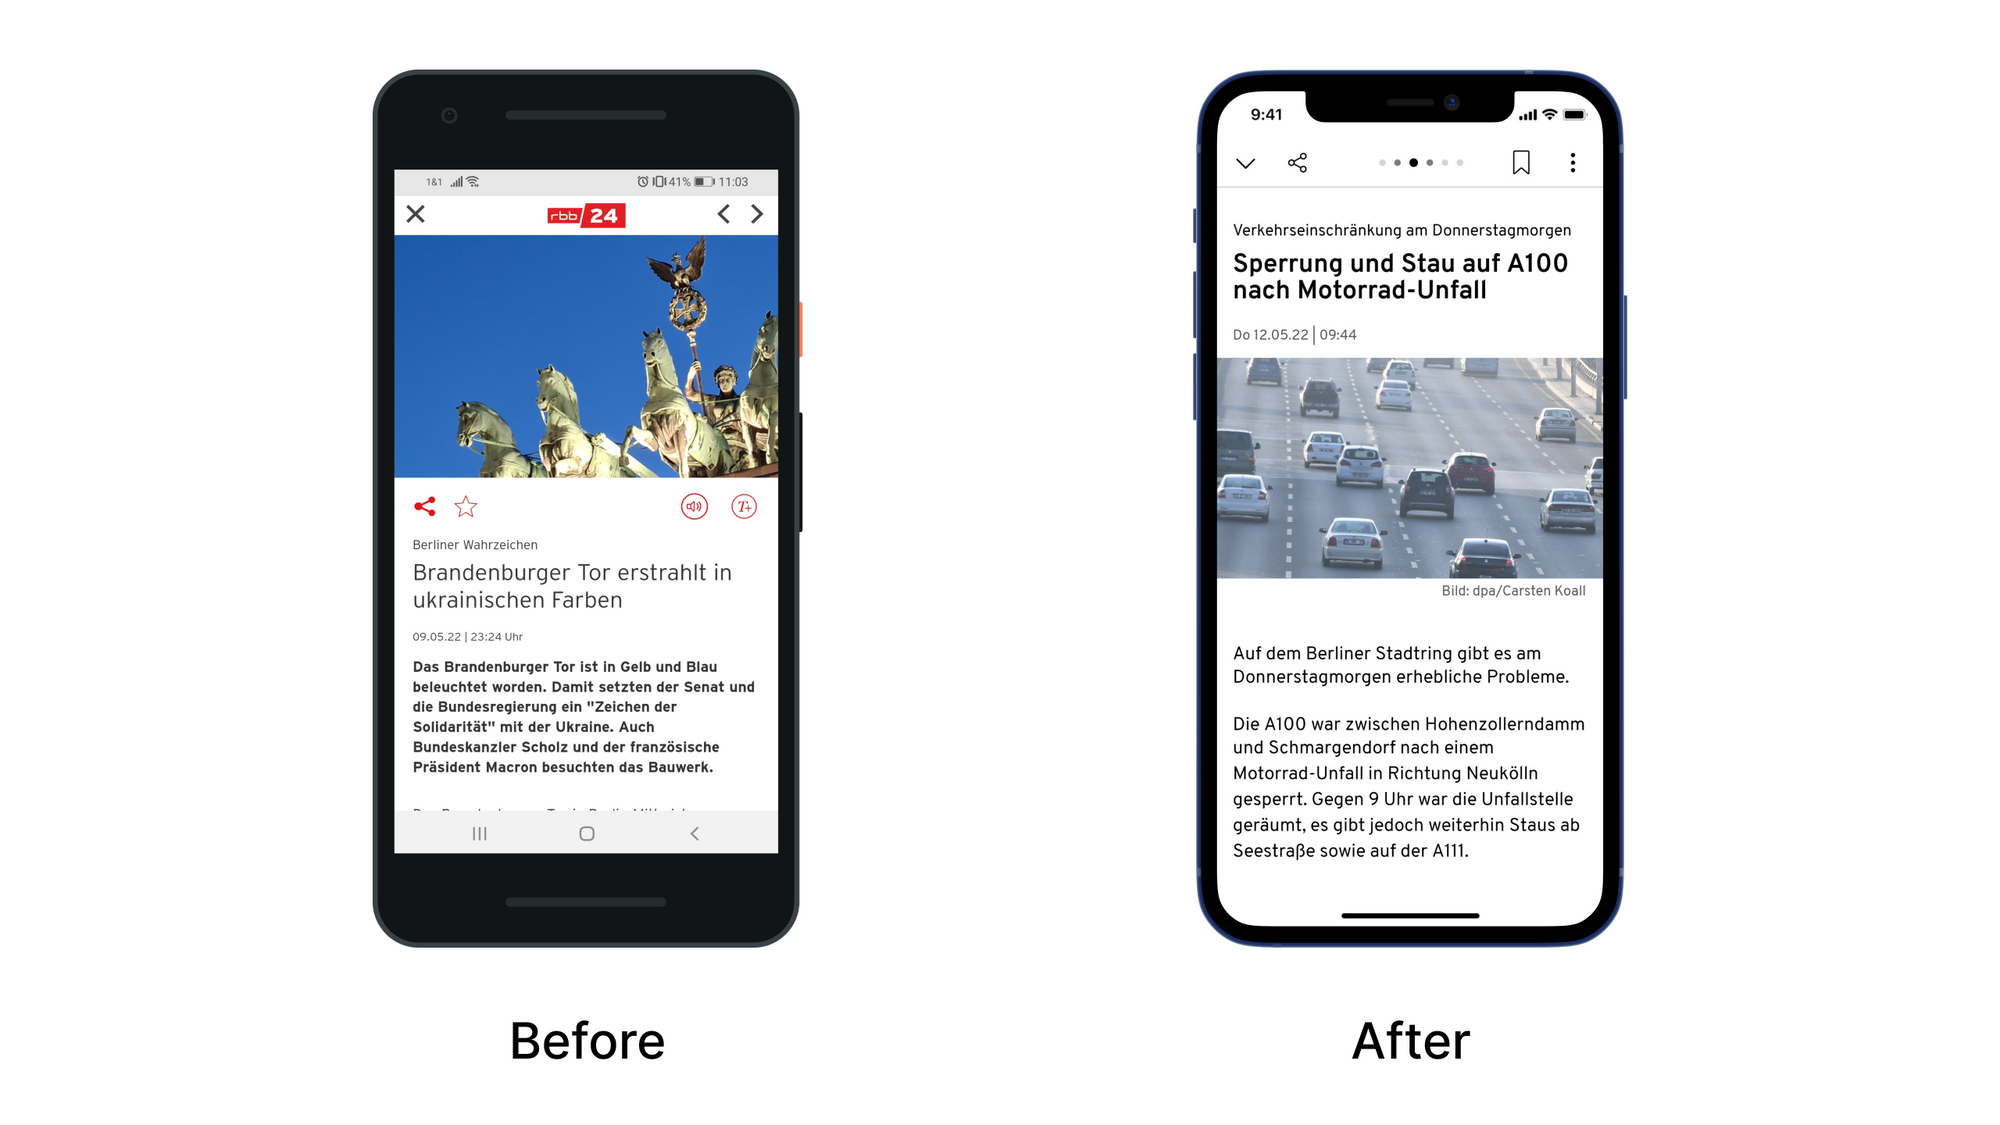 View of a single article in rbb24 App - before & after